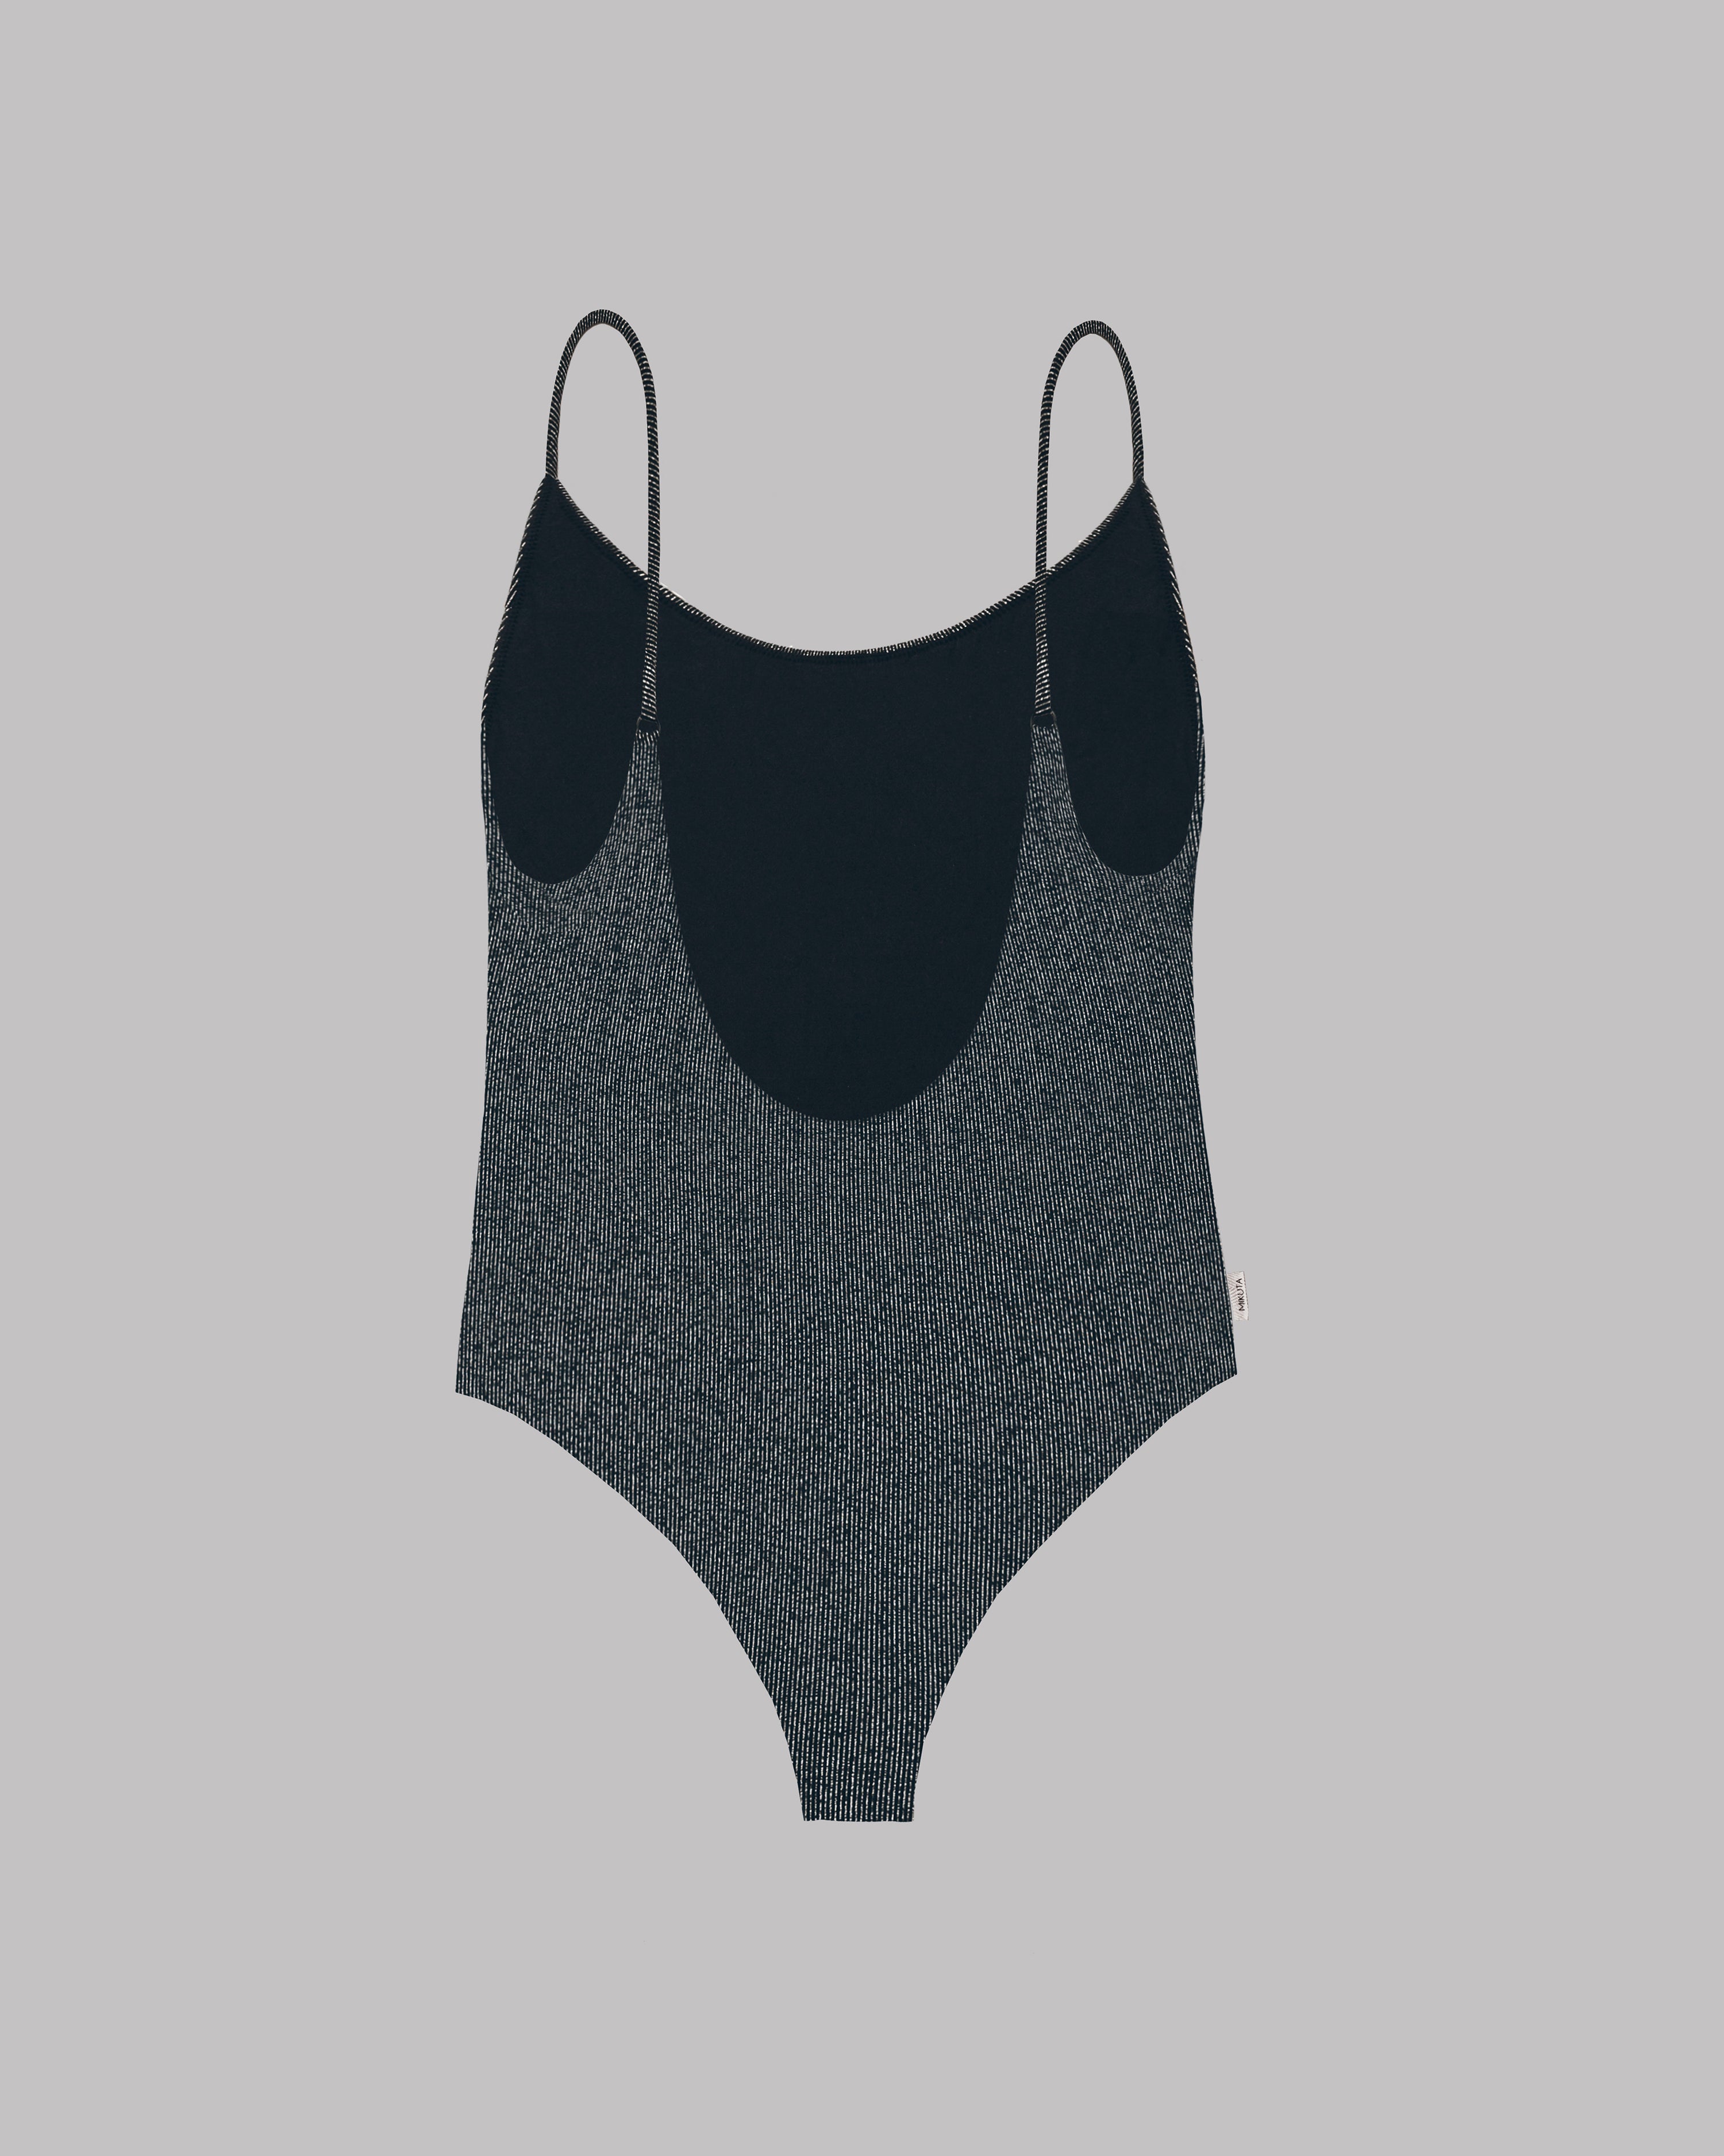 The Black Sparkly Swimsuit